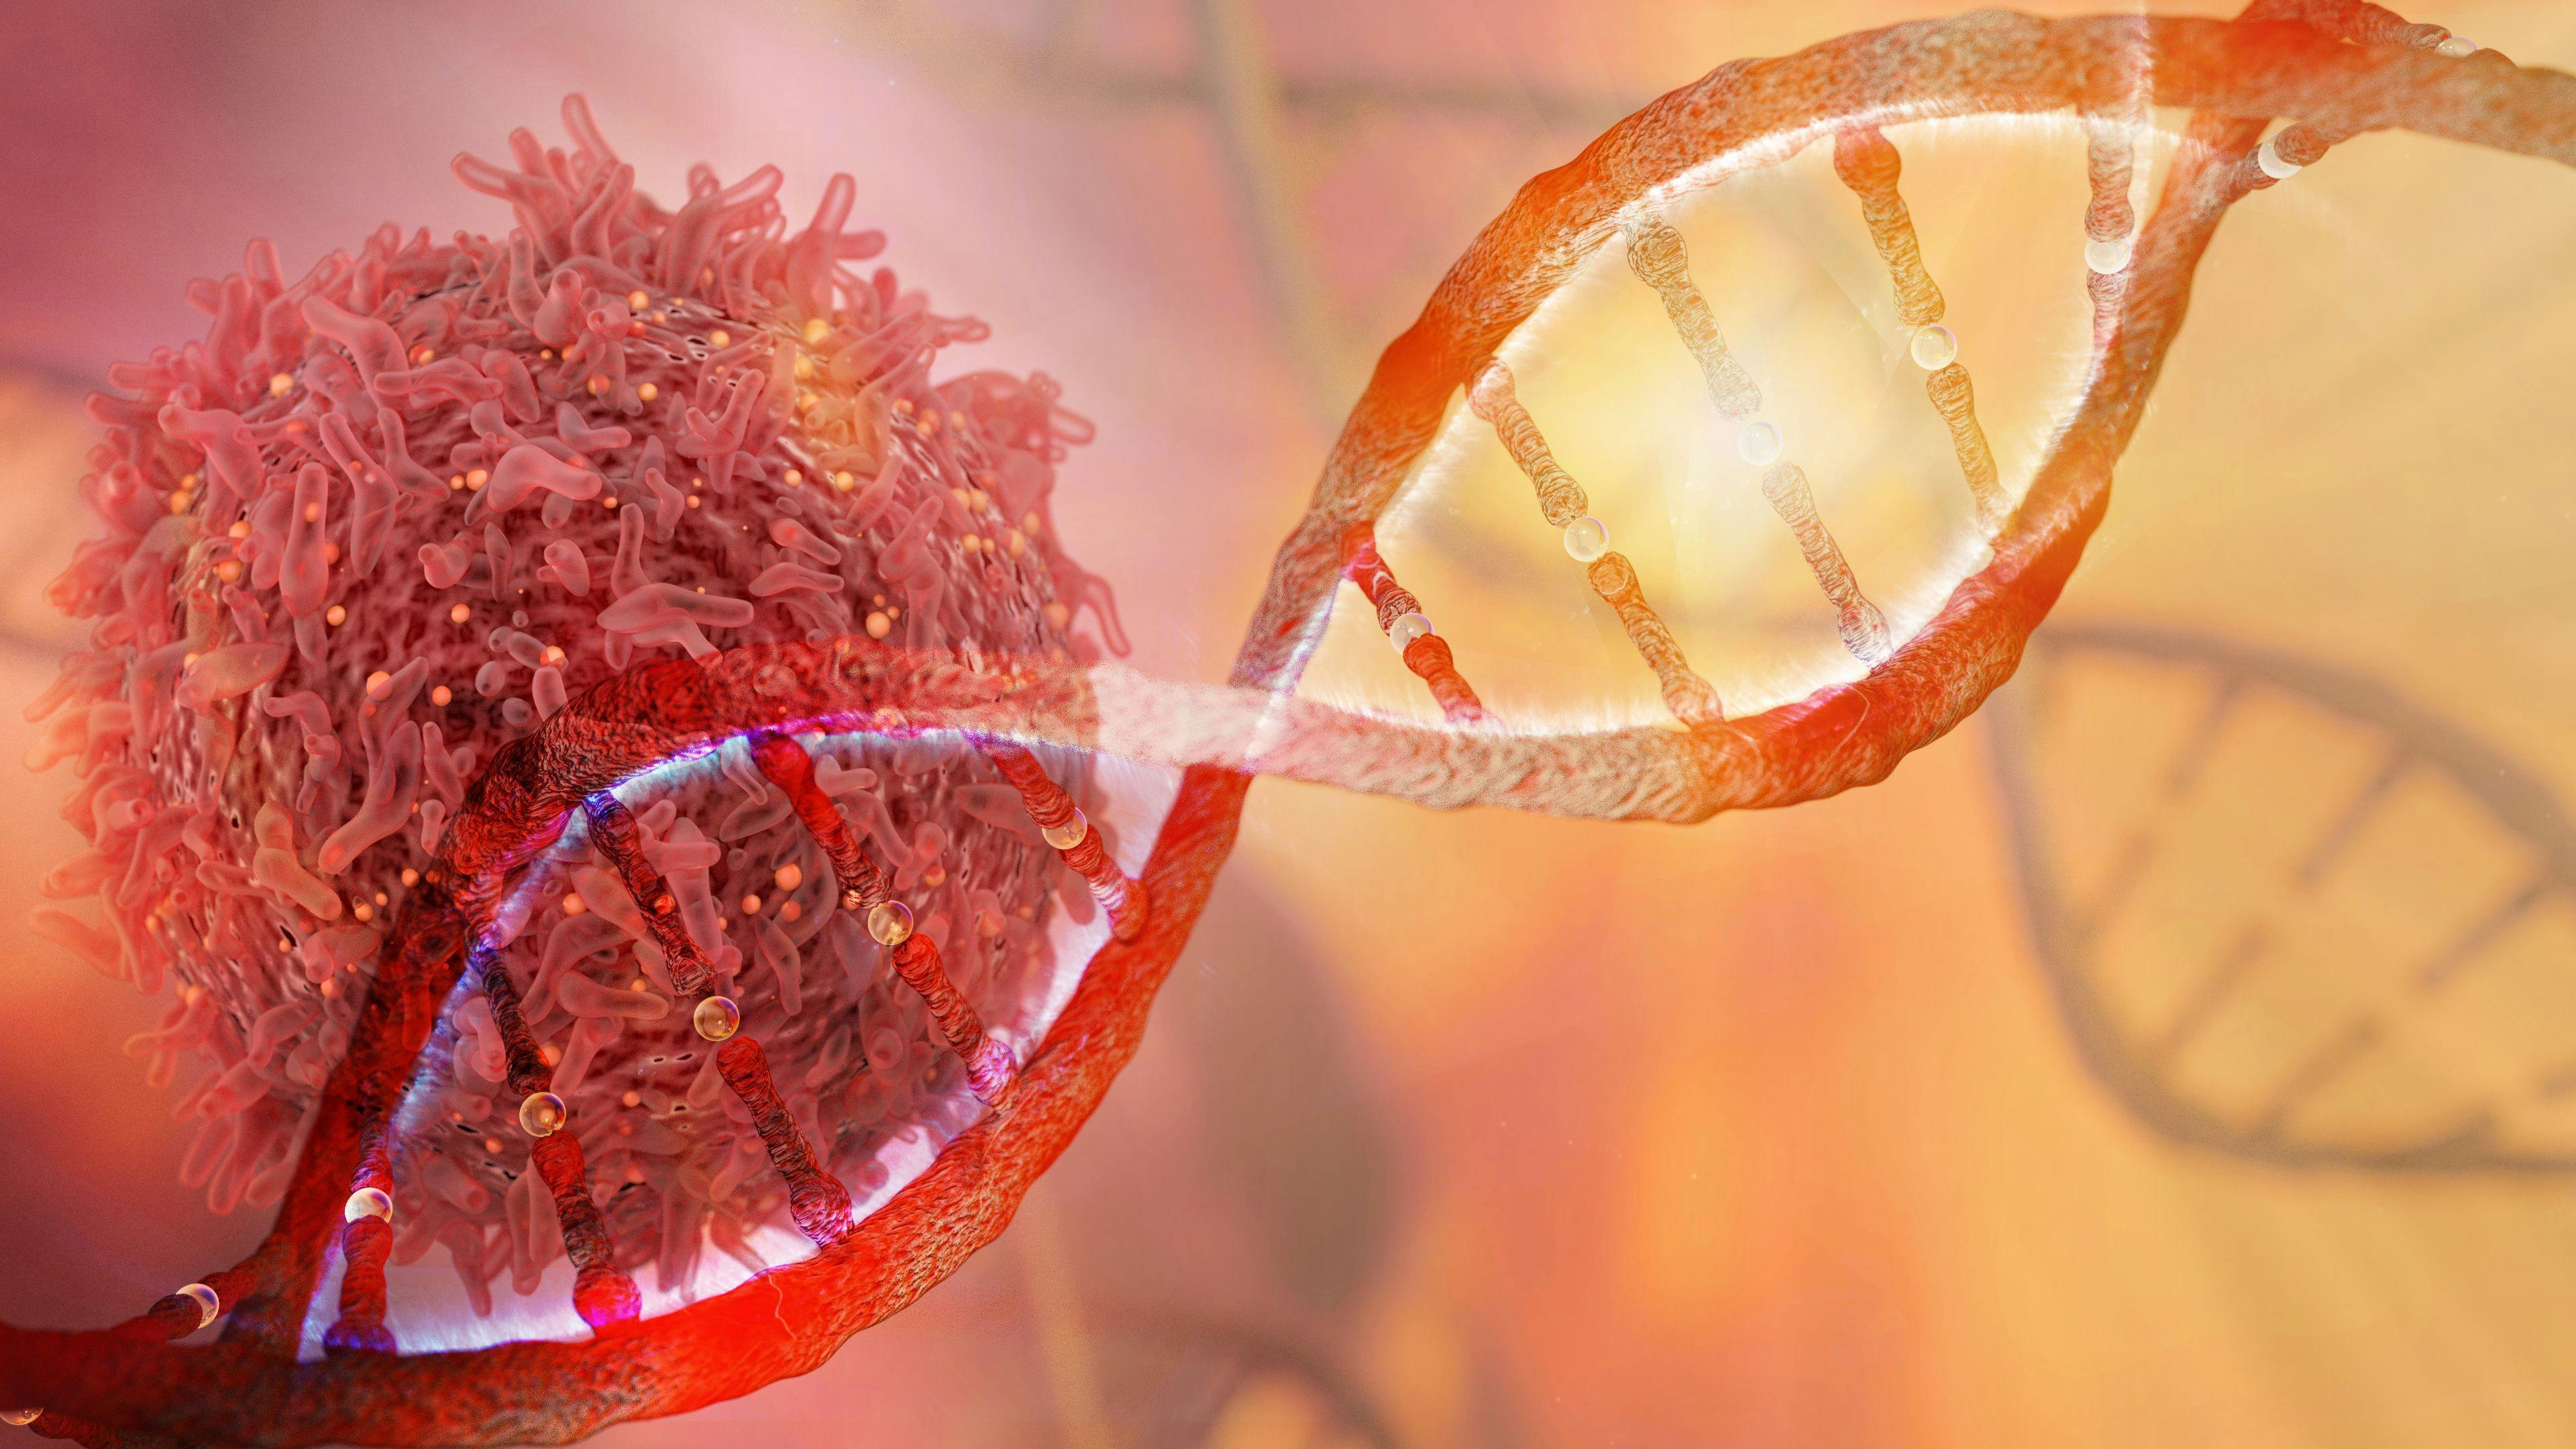 DNA strand and Cancer Cell Oncology Research Concept 3D rendering | catalin - stock.adobe.com